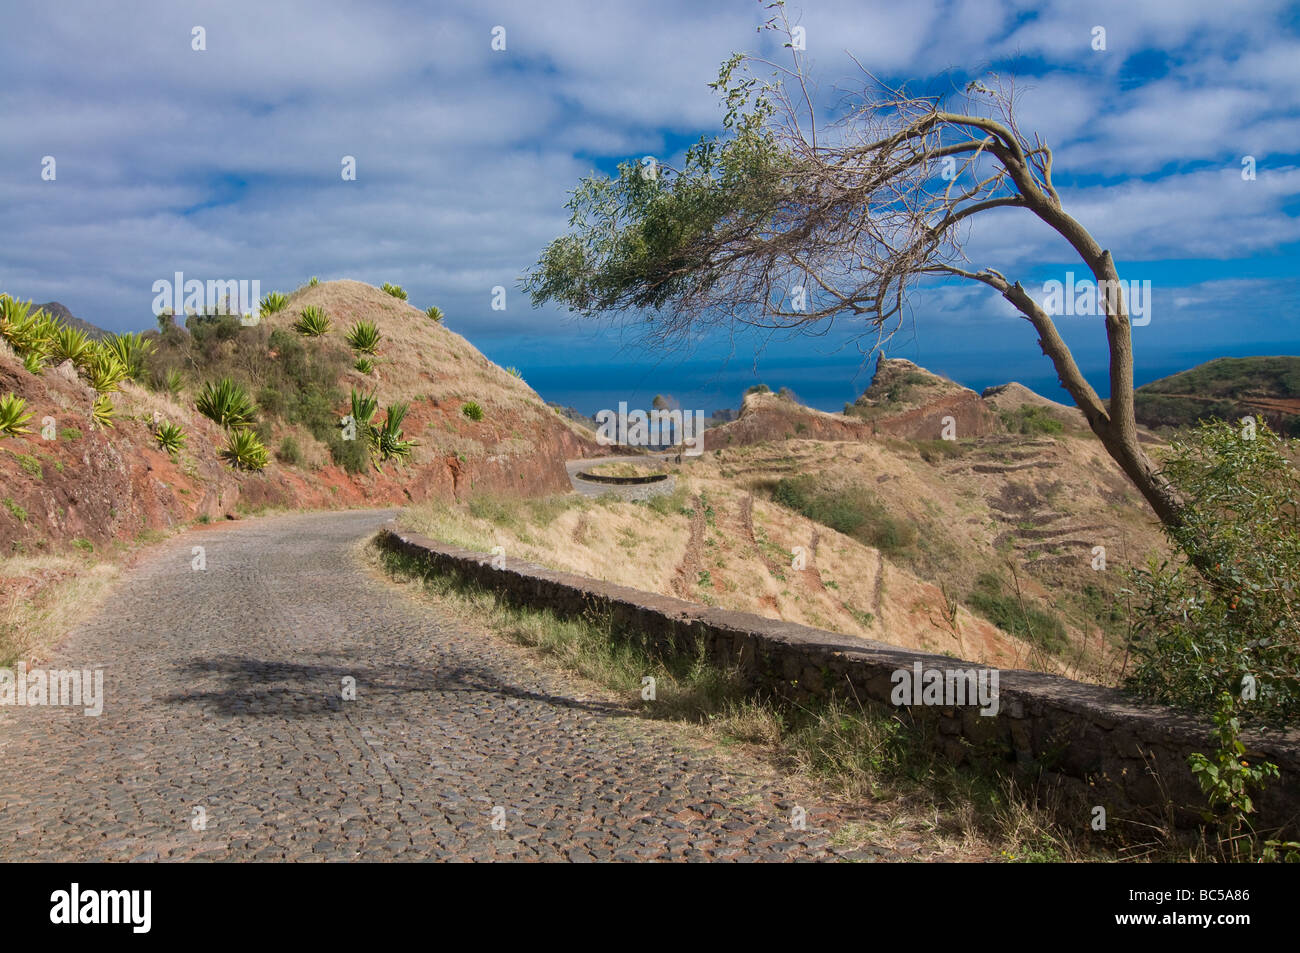 Road leads along a dryed up tree in rocky landscape San Antao Cabo Verde Africa Stock Photo